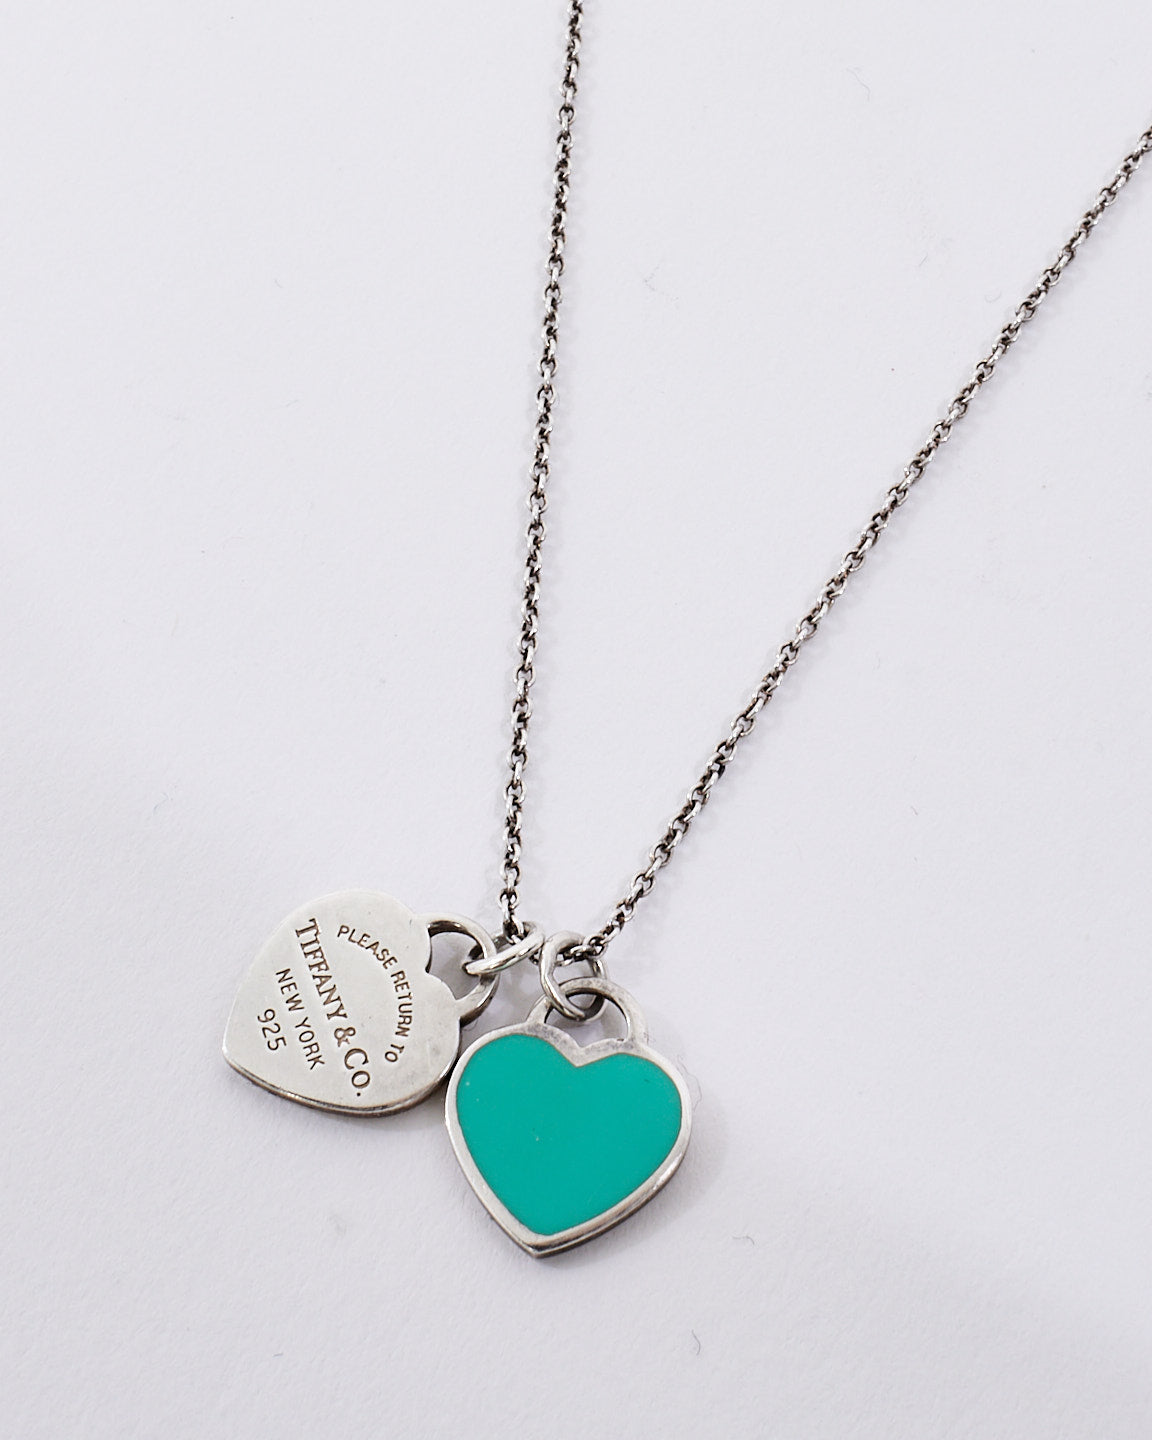 Tiffany & Co. Sterling Silver Double Heart Tag Pendant Necklace